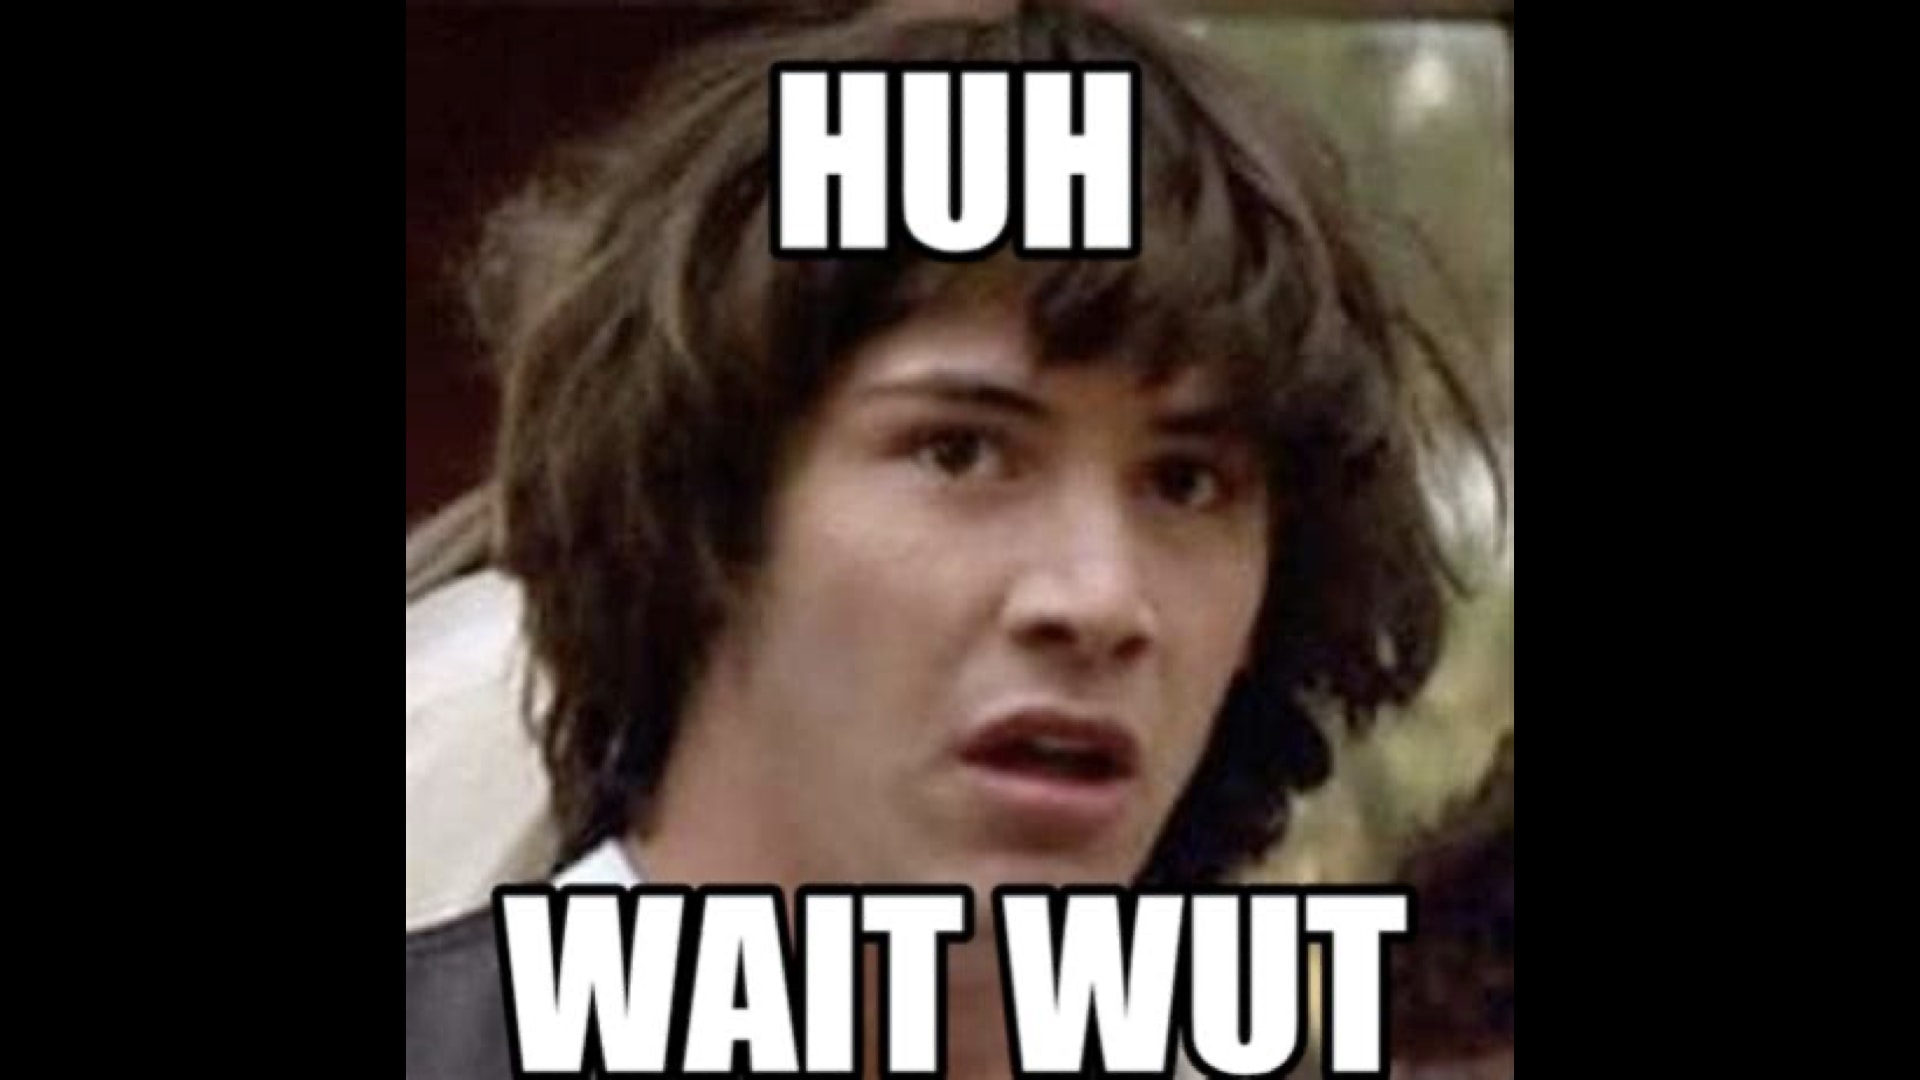 A meme style photo of Keanu Reeves from Bill and Ted. It's subtitled 'HUH WAIT WUT?'